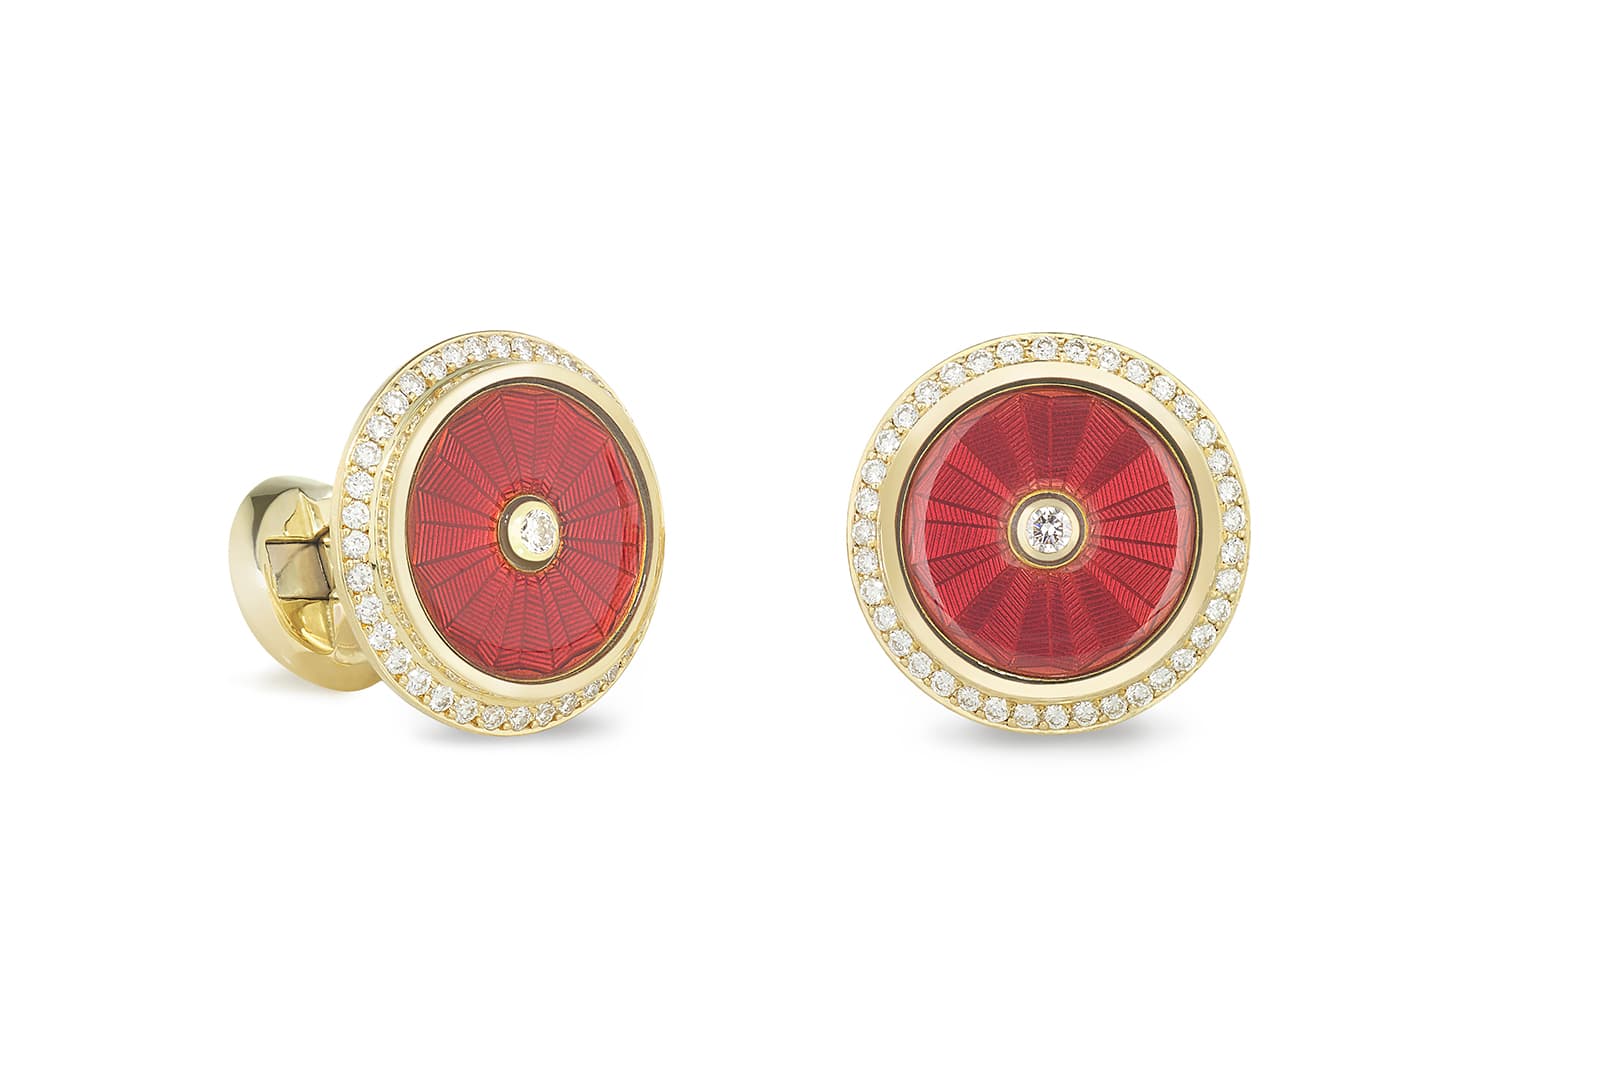 Decorated Grooms: Luxury Cufflinks for a Refined Wedding Day